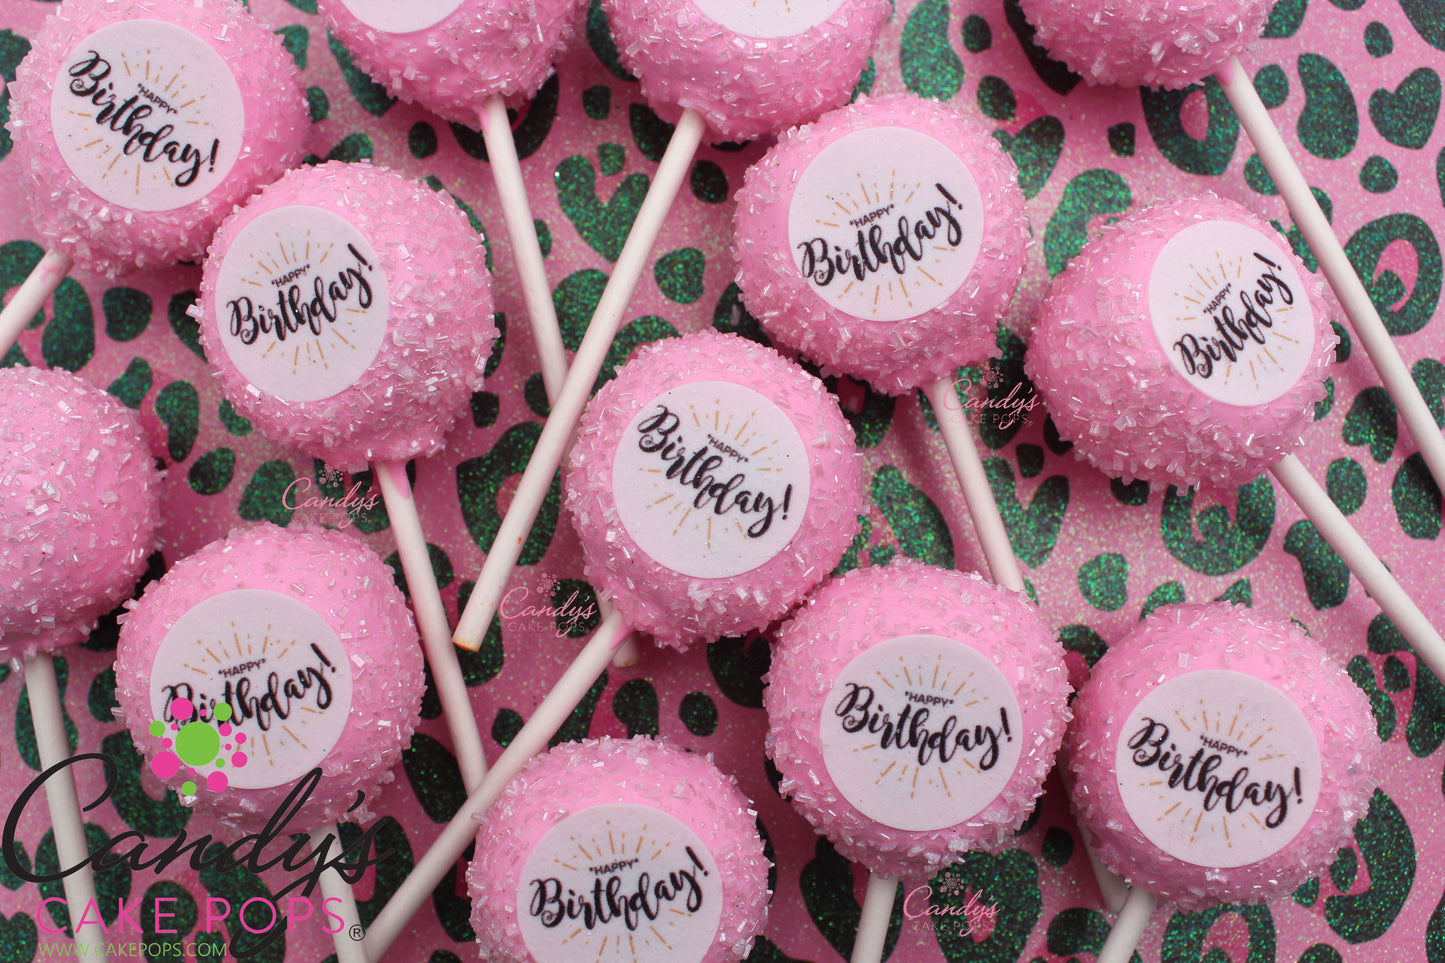 Glam Birthday Edible Decal Cake Pops (Choose Color and Sprinkles : Silver, Gold, or White Diamonds) - Candy's Cake Pops